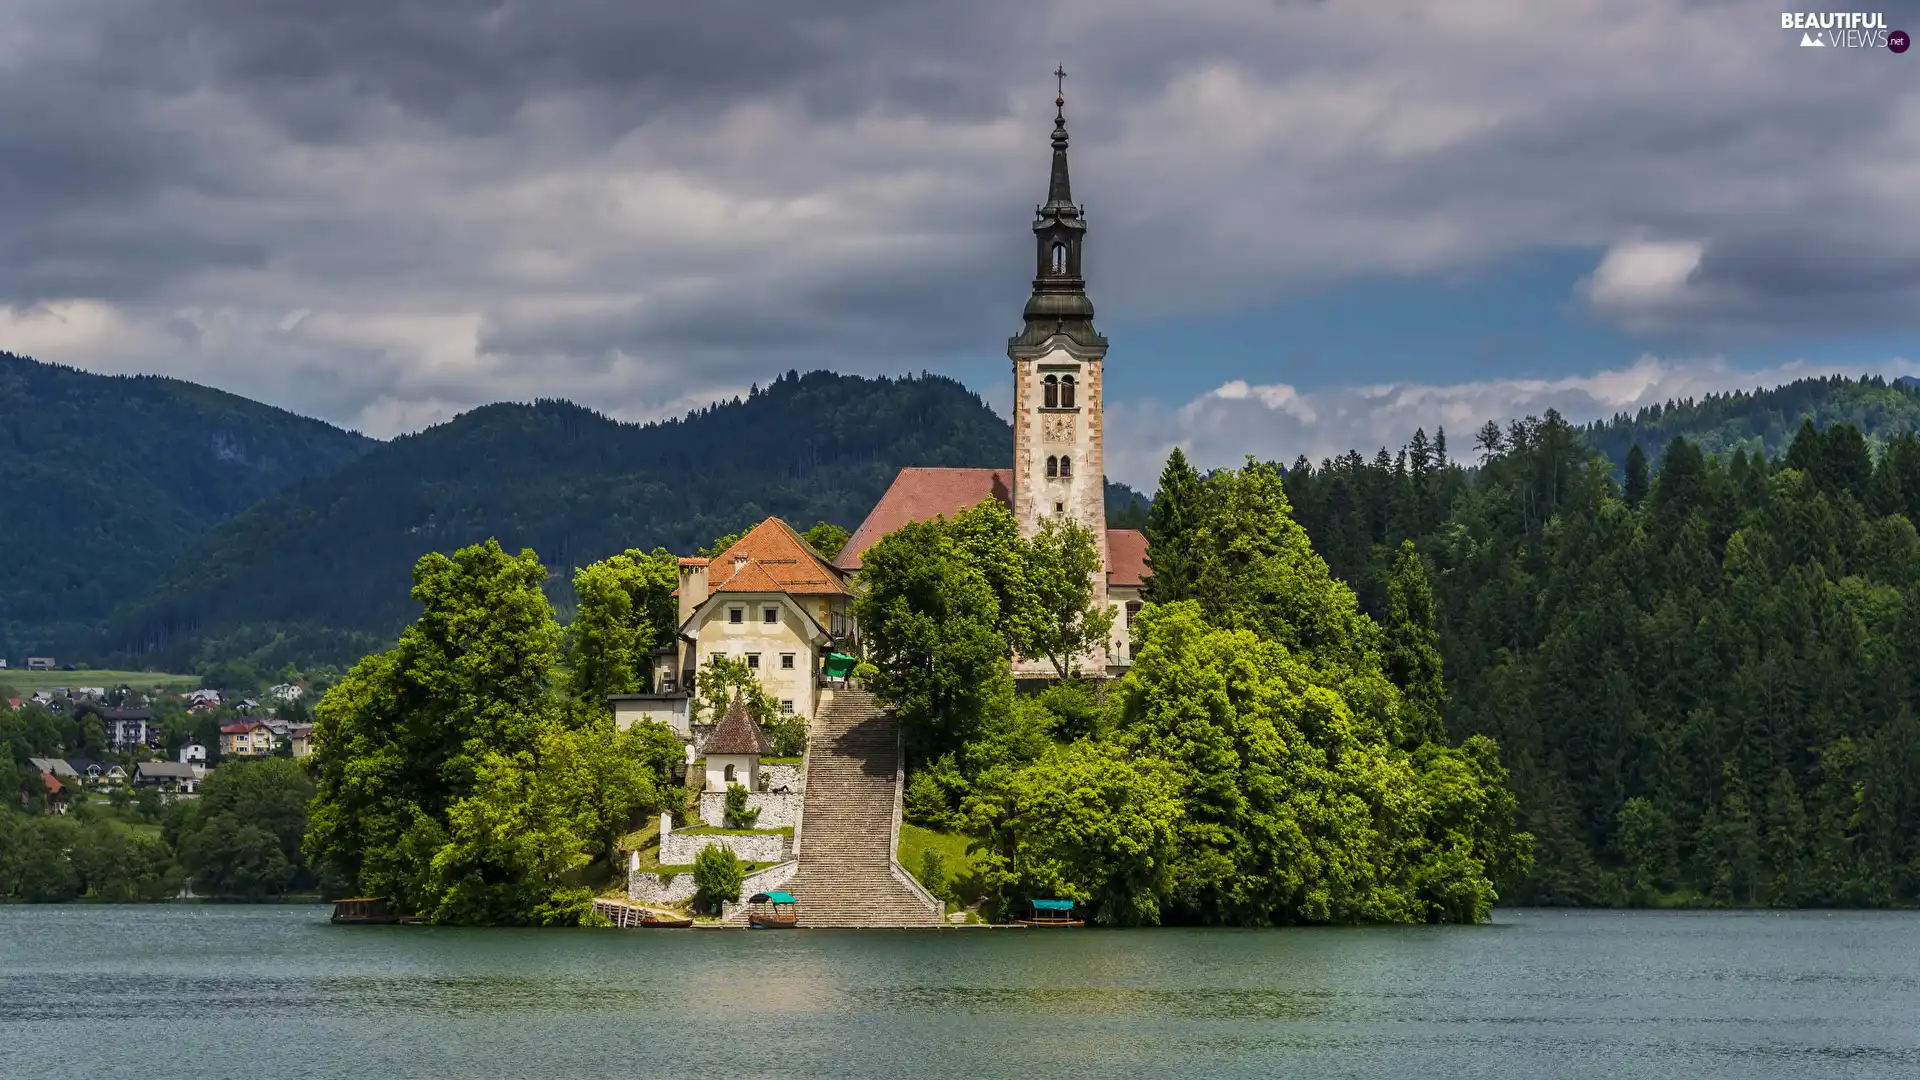 woods, Blejski Otok Island, Church of the Assumption of the Virgin Mary, viewes, Stairs, Slovenia, Lake Bled, clouds, trees, Mountains